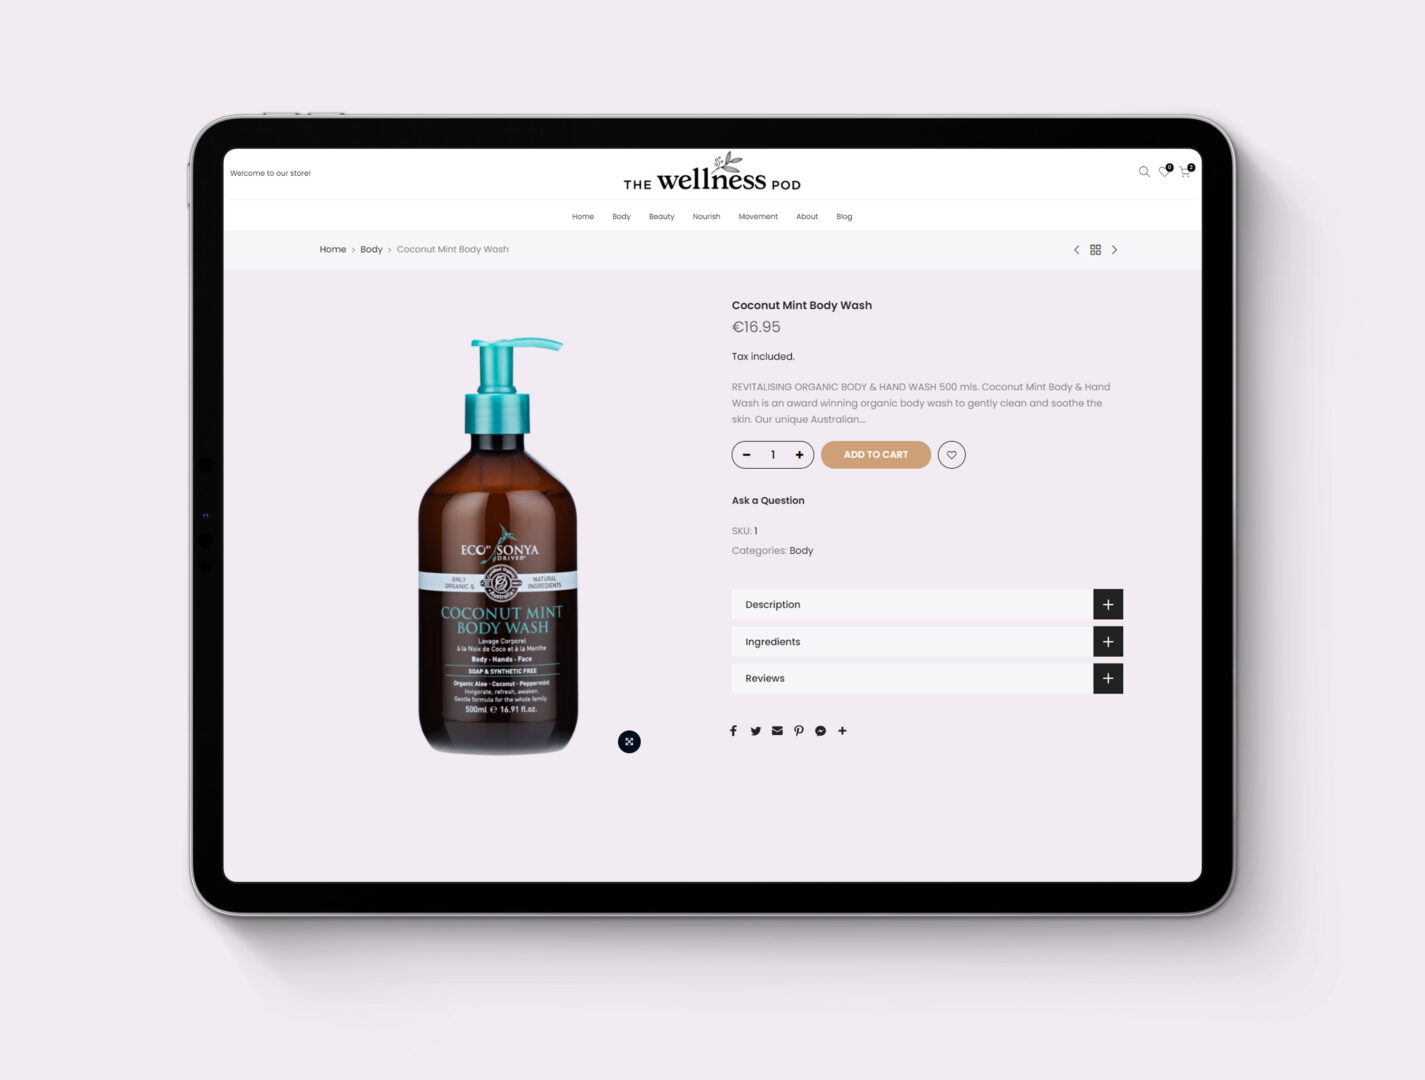 Product detail page layout